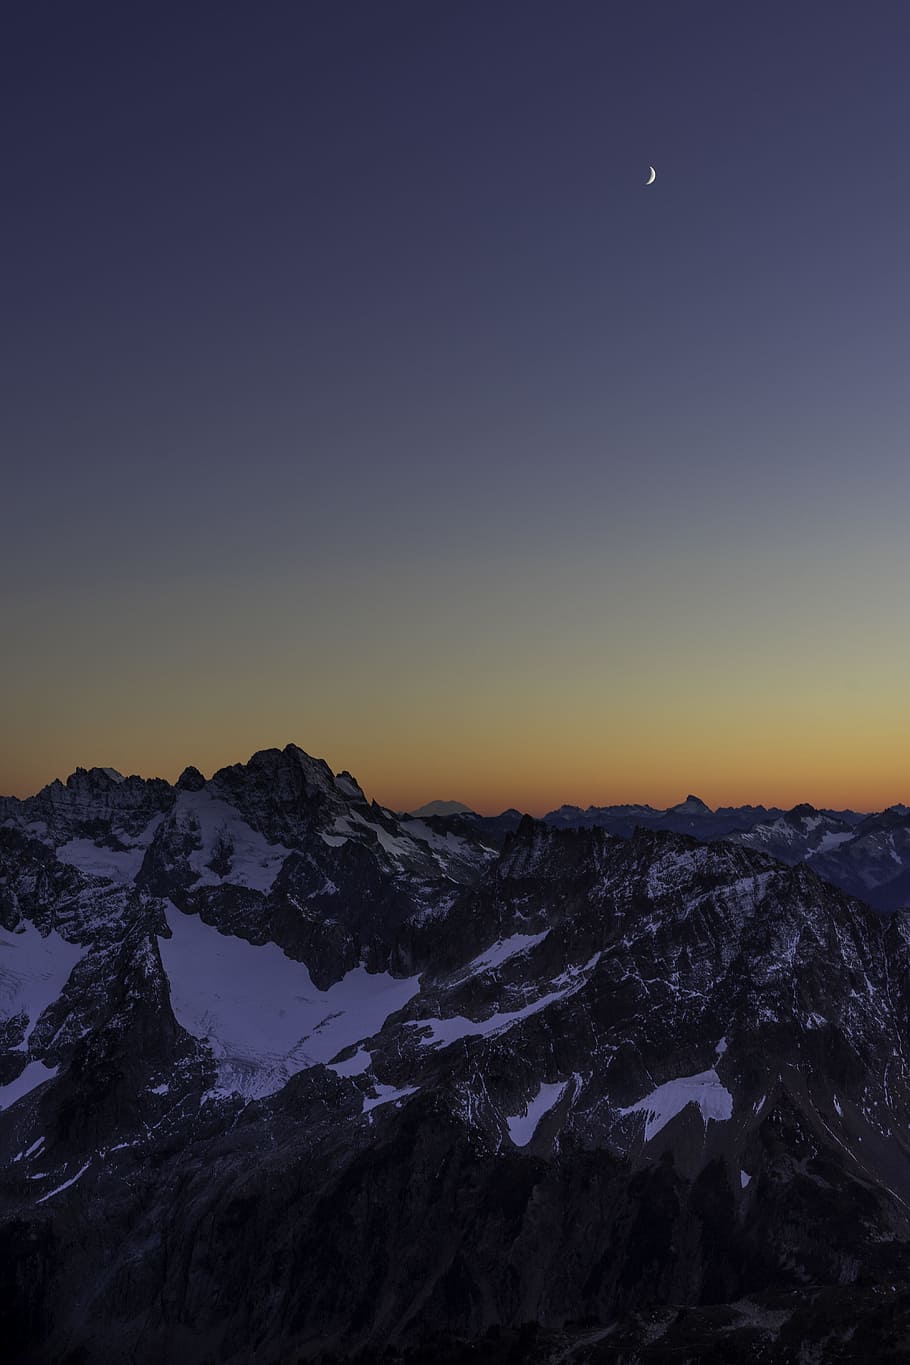 snow capped mountain during golden hour, star, sunset, sunrise